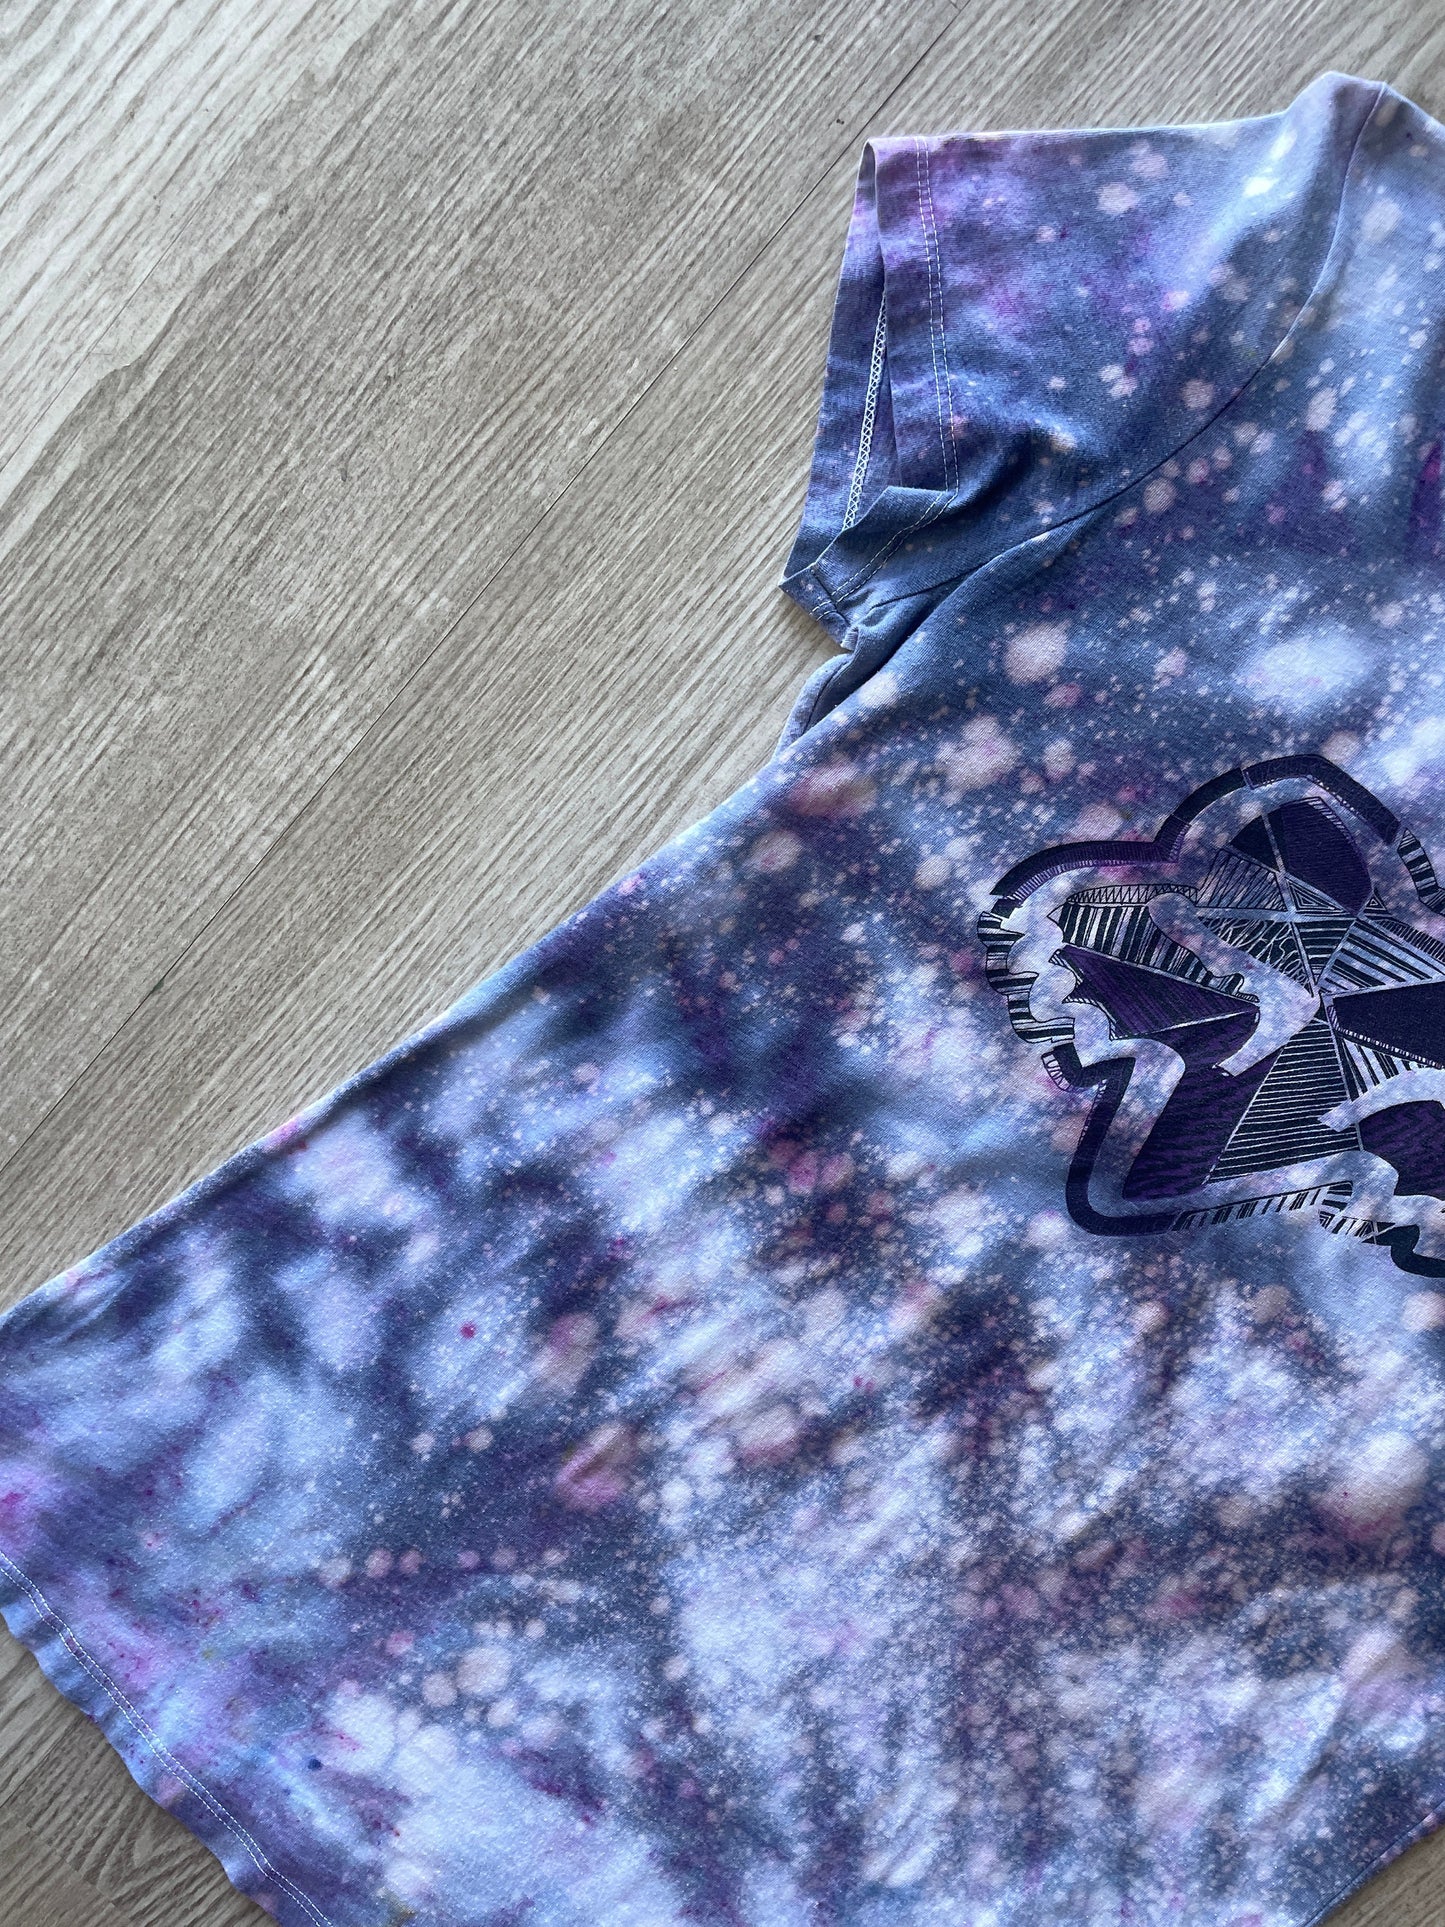 LARGE Women's Fox Racing Handmade Tie Dye Short Sleeve T-Shirt | One-Of-a-Kind Upcycled Gray and Purple Ice Dye Crumpled Top